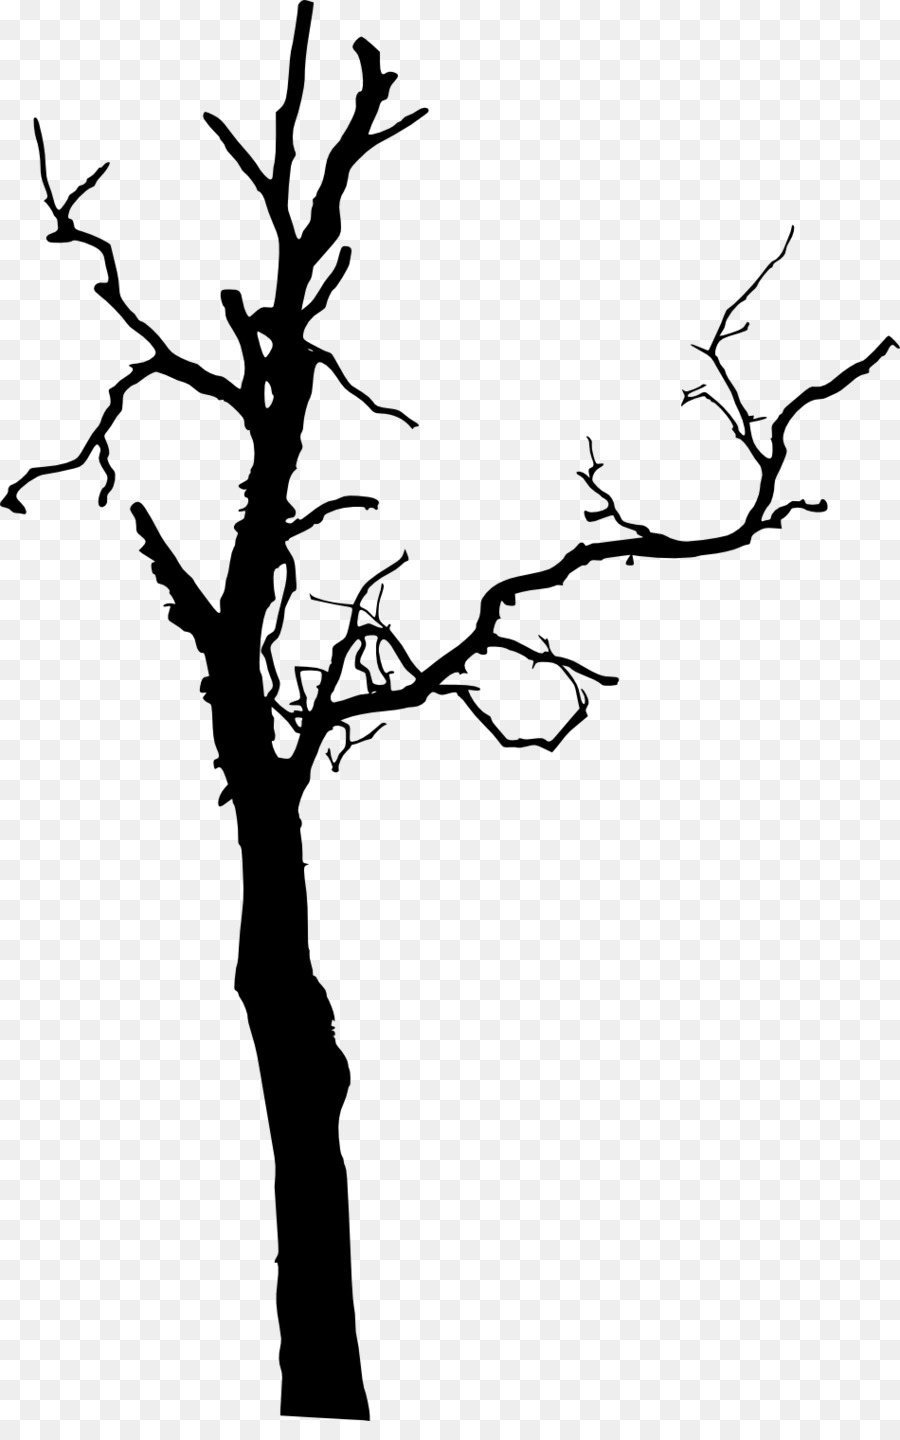 Tree Clip art - tree silhouette png download - 950*1500 - Free Transparent Tree png Download.